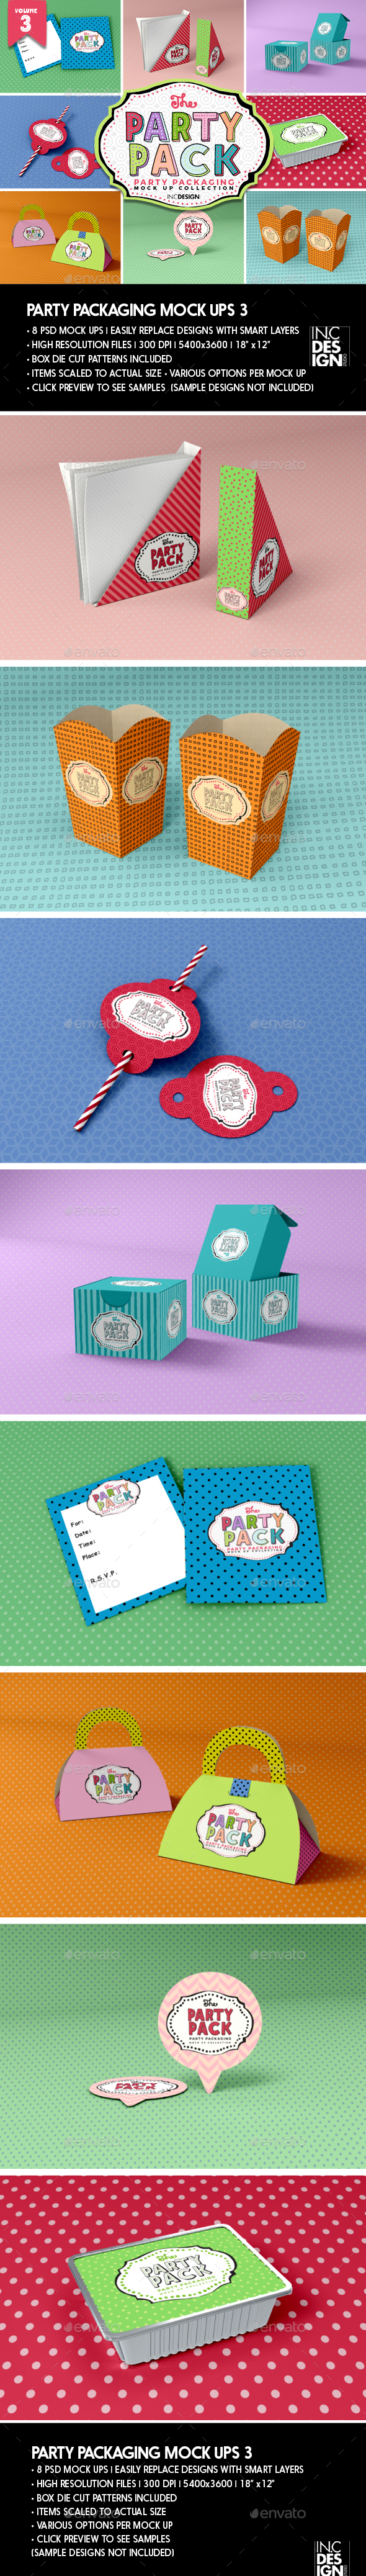 The Party Pack Packaging Mock Ups 3